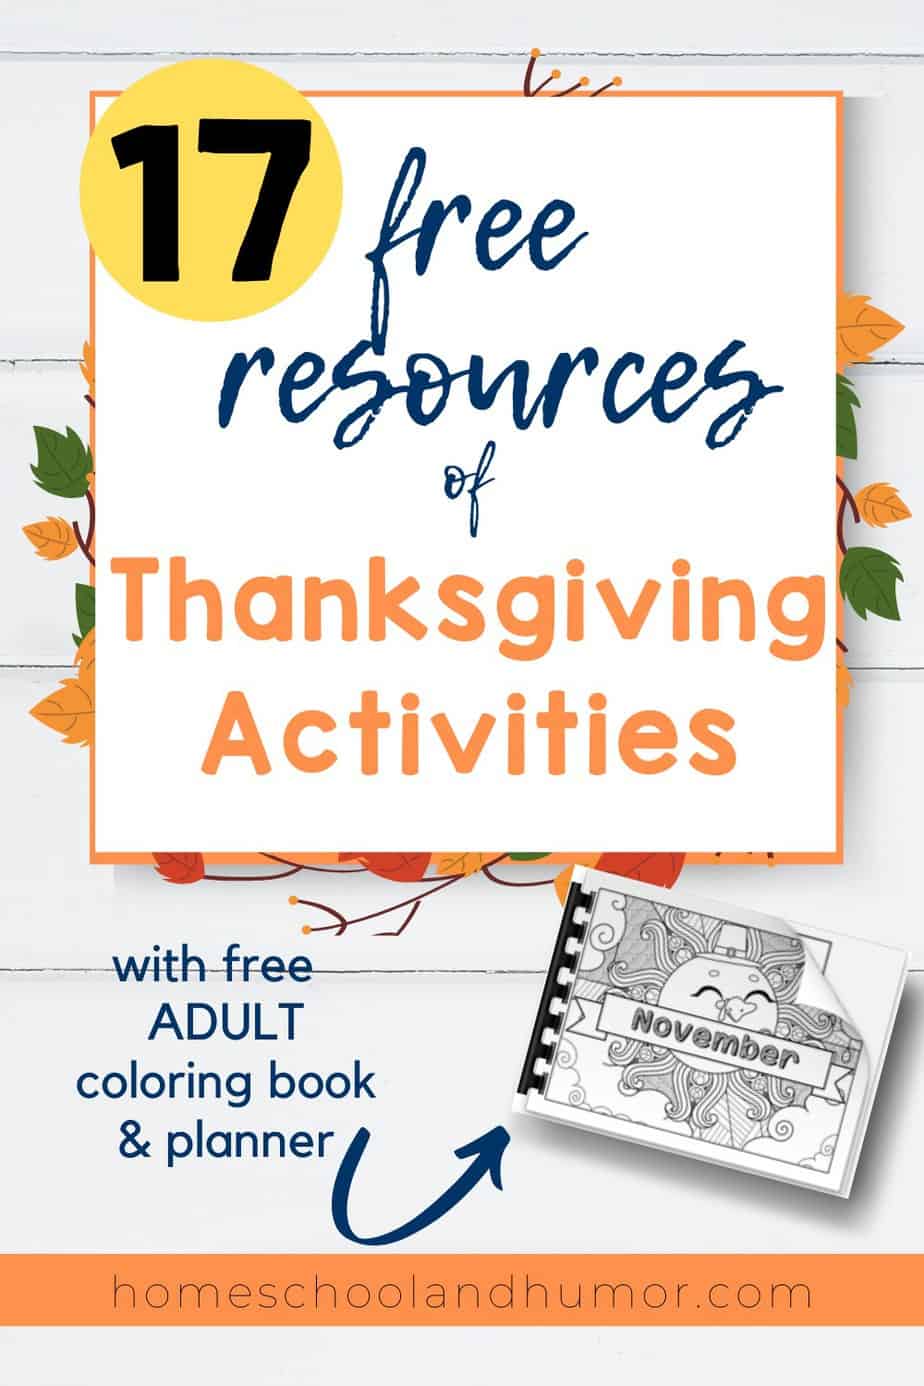 17 Fun & Free Thanksgiving Activities + 2 Free Thanksgiving Coloring Pages